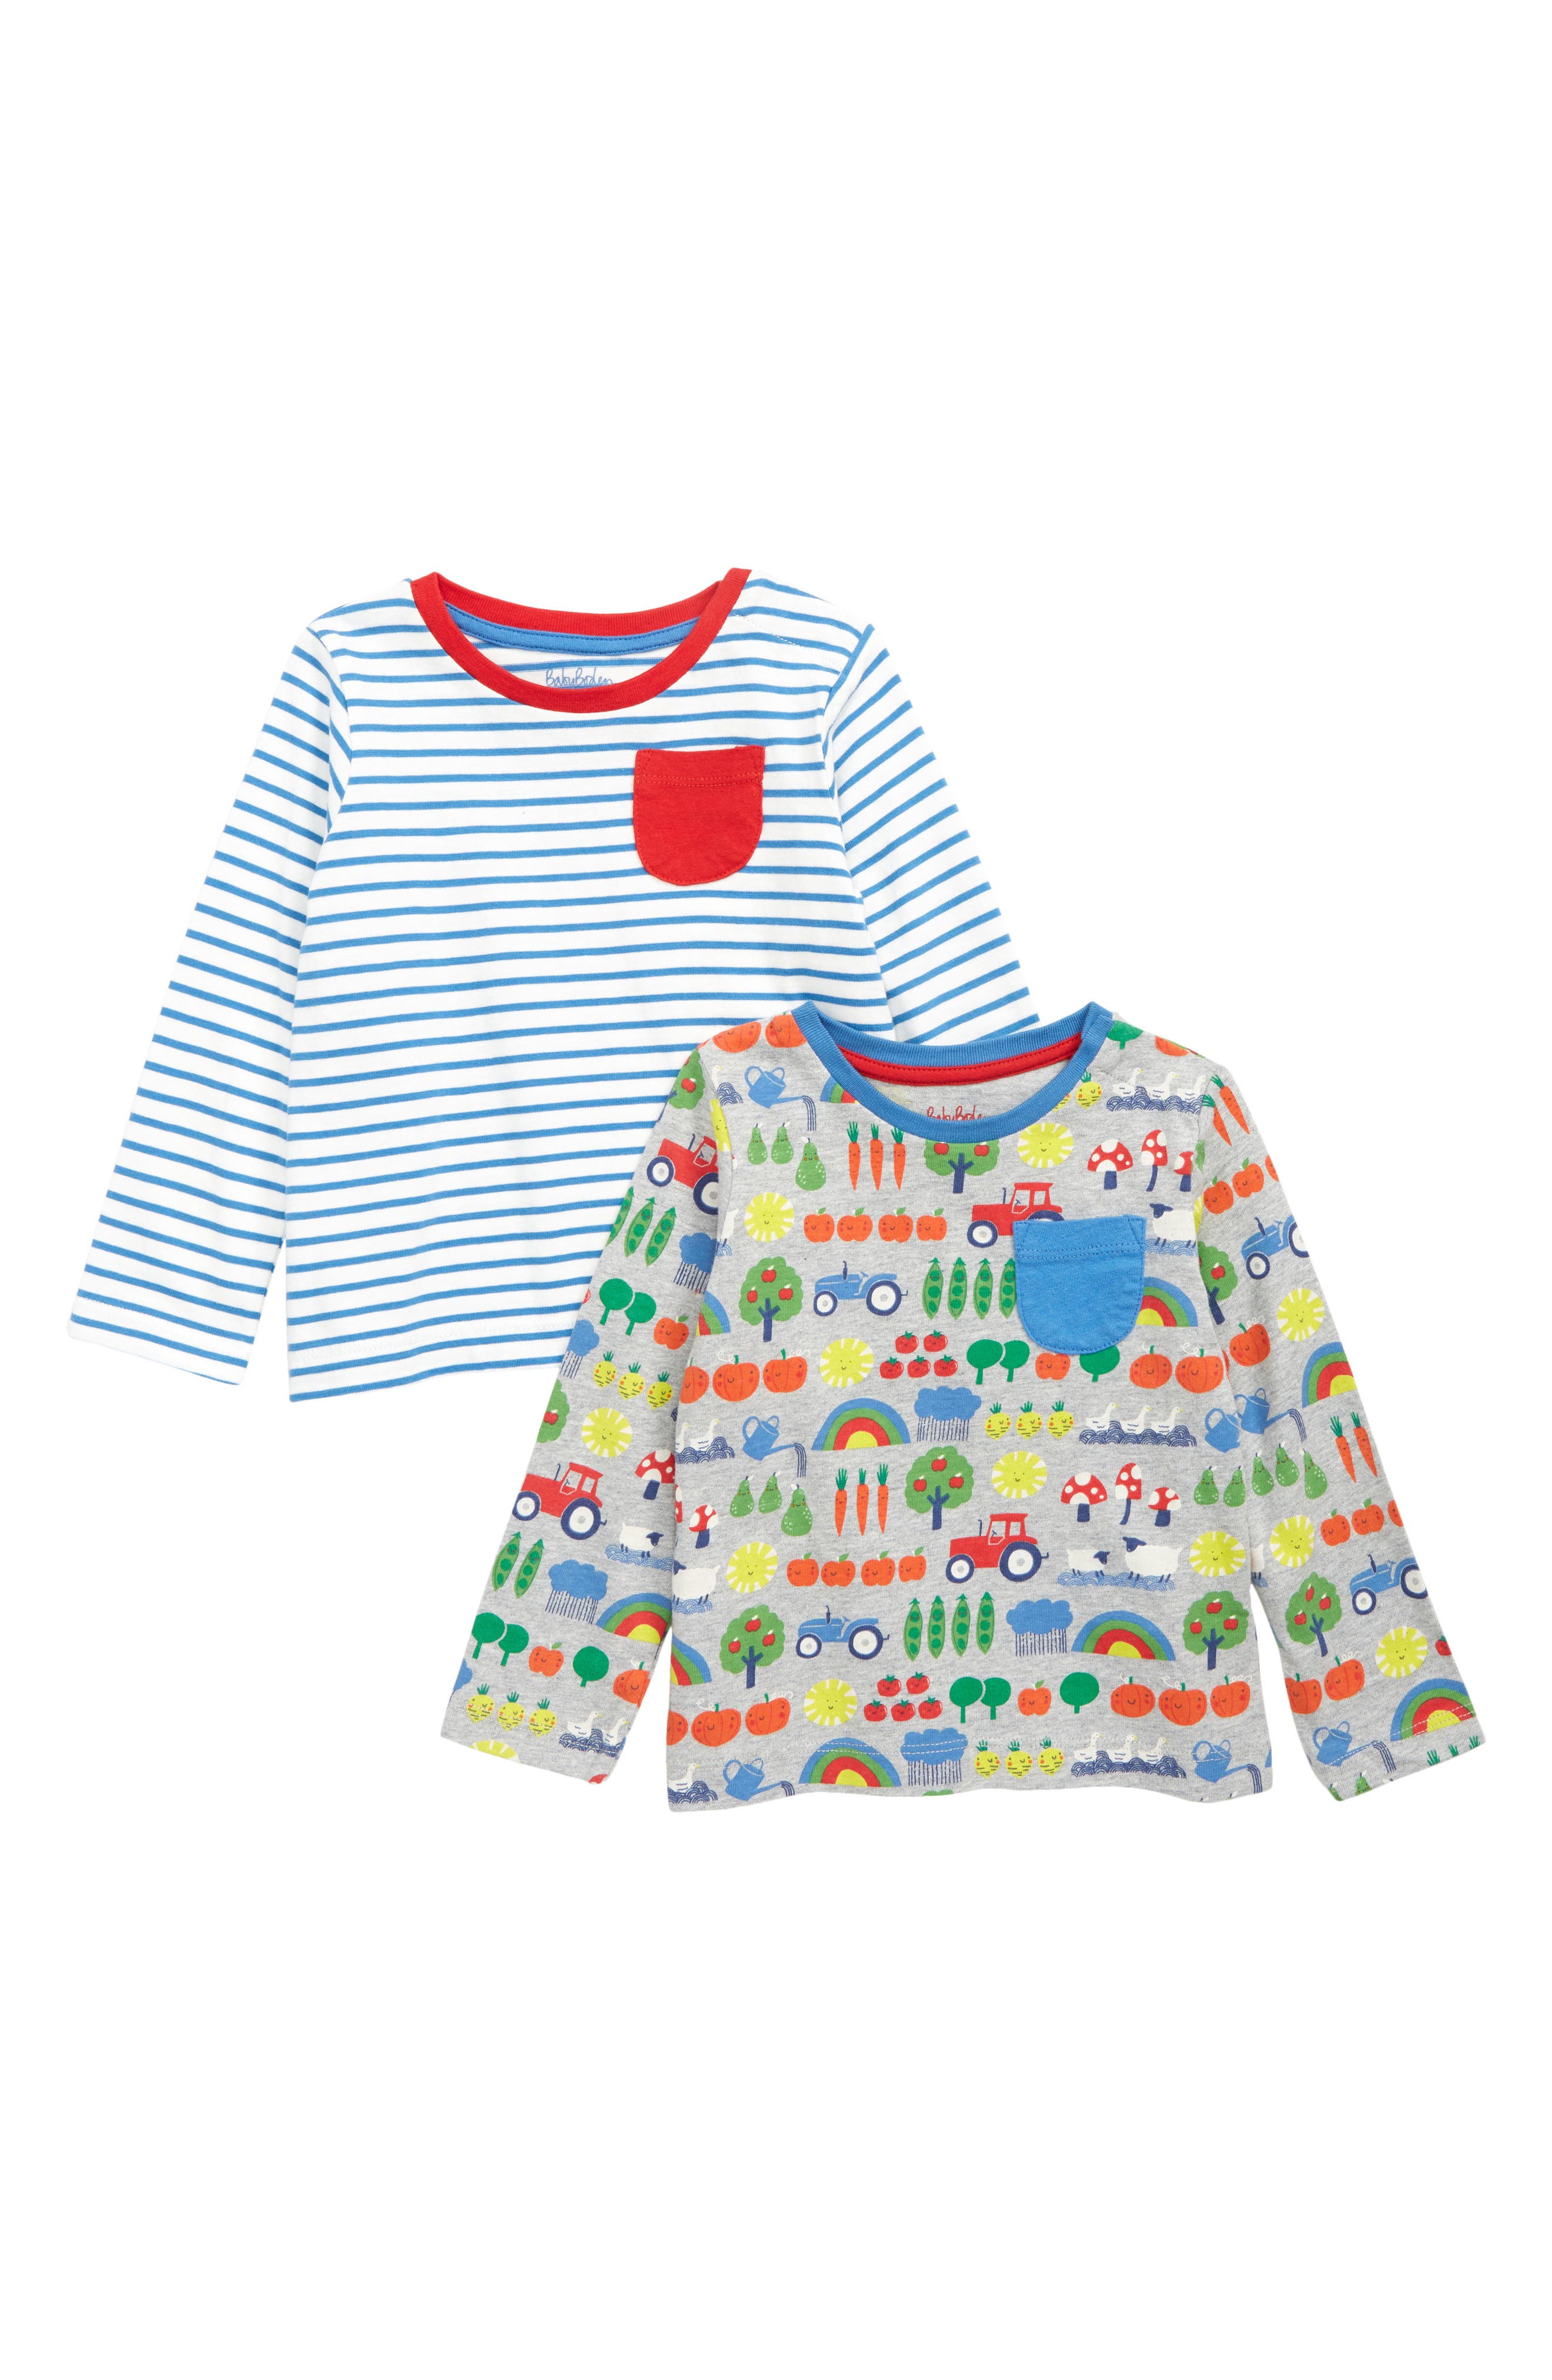 MINI BODEN Baby Boys Top Jersey Cotton Striped Sea Creatures Turtle Embroidered 